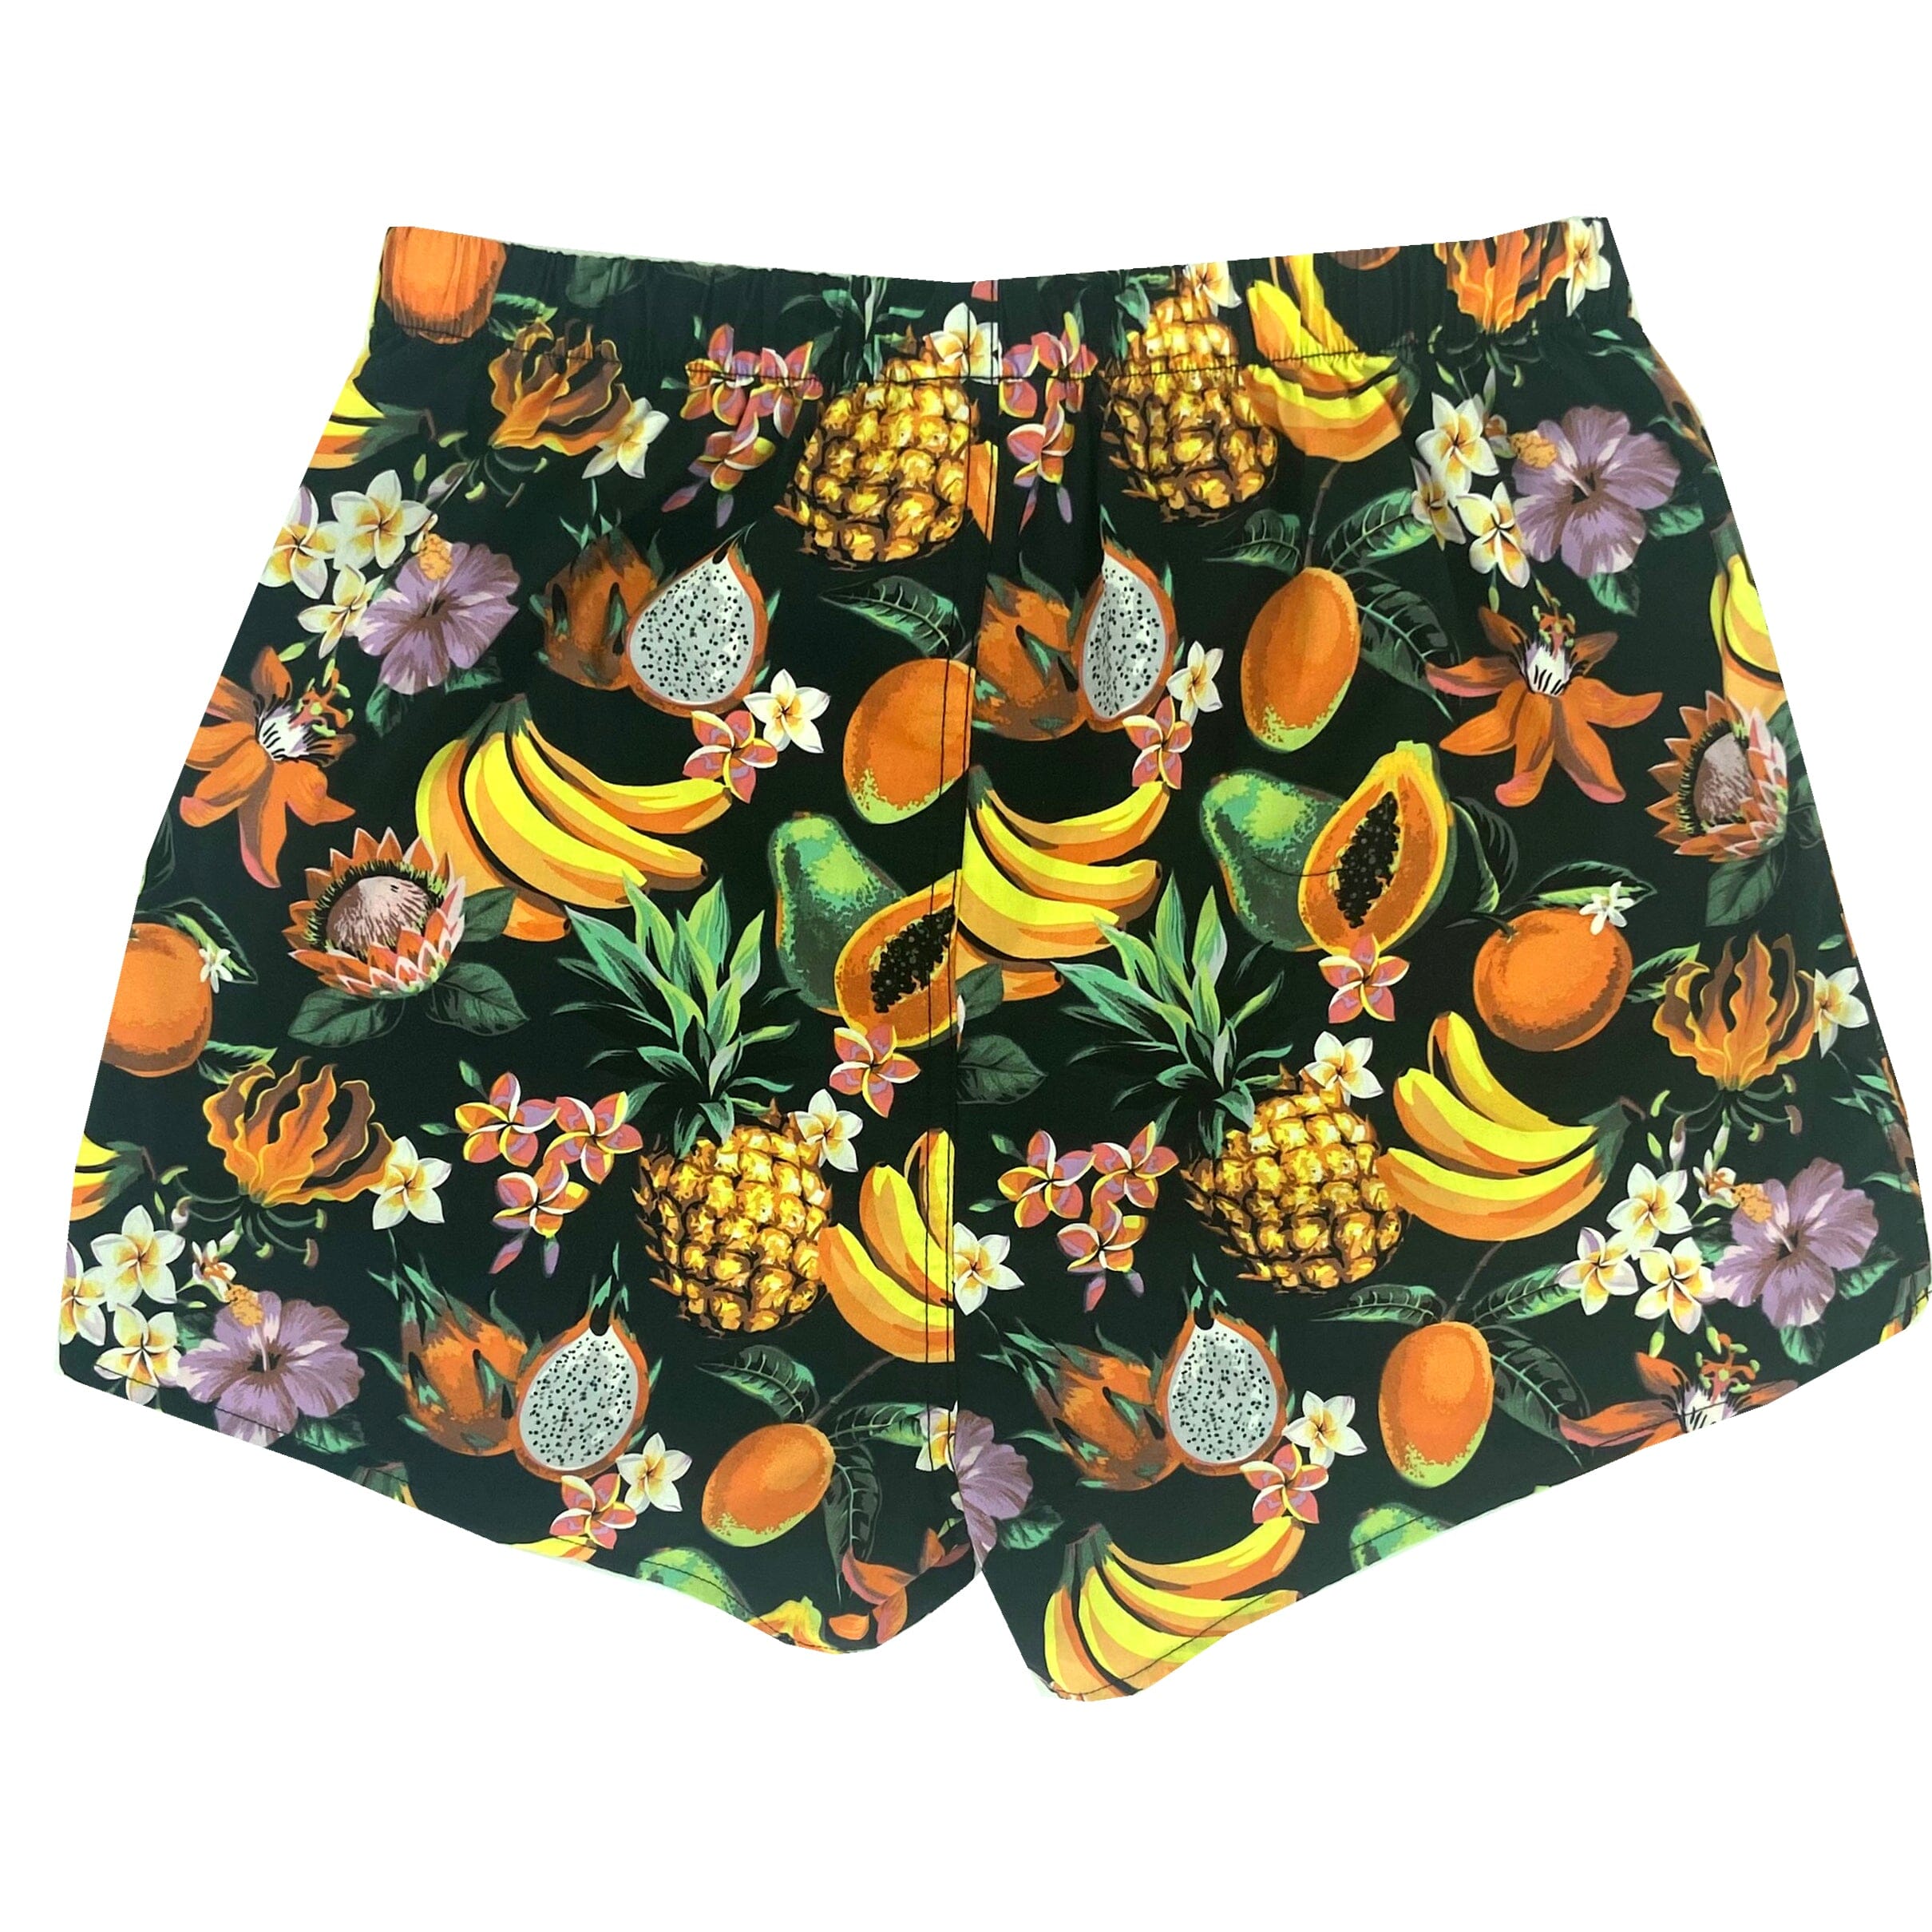 Yummy Men's Tropical Fruits and Flowers Patterned Cotton Boxer Shorts